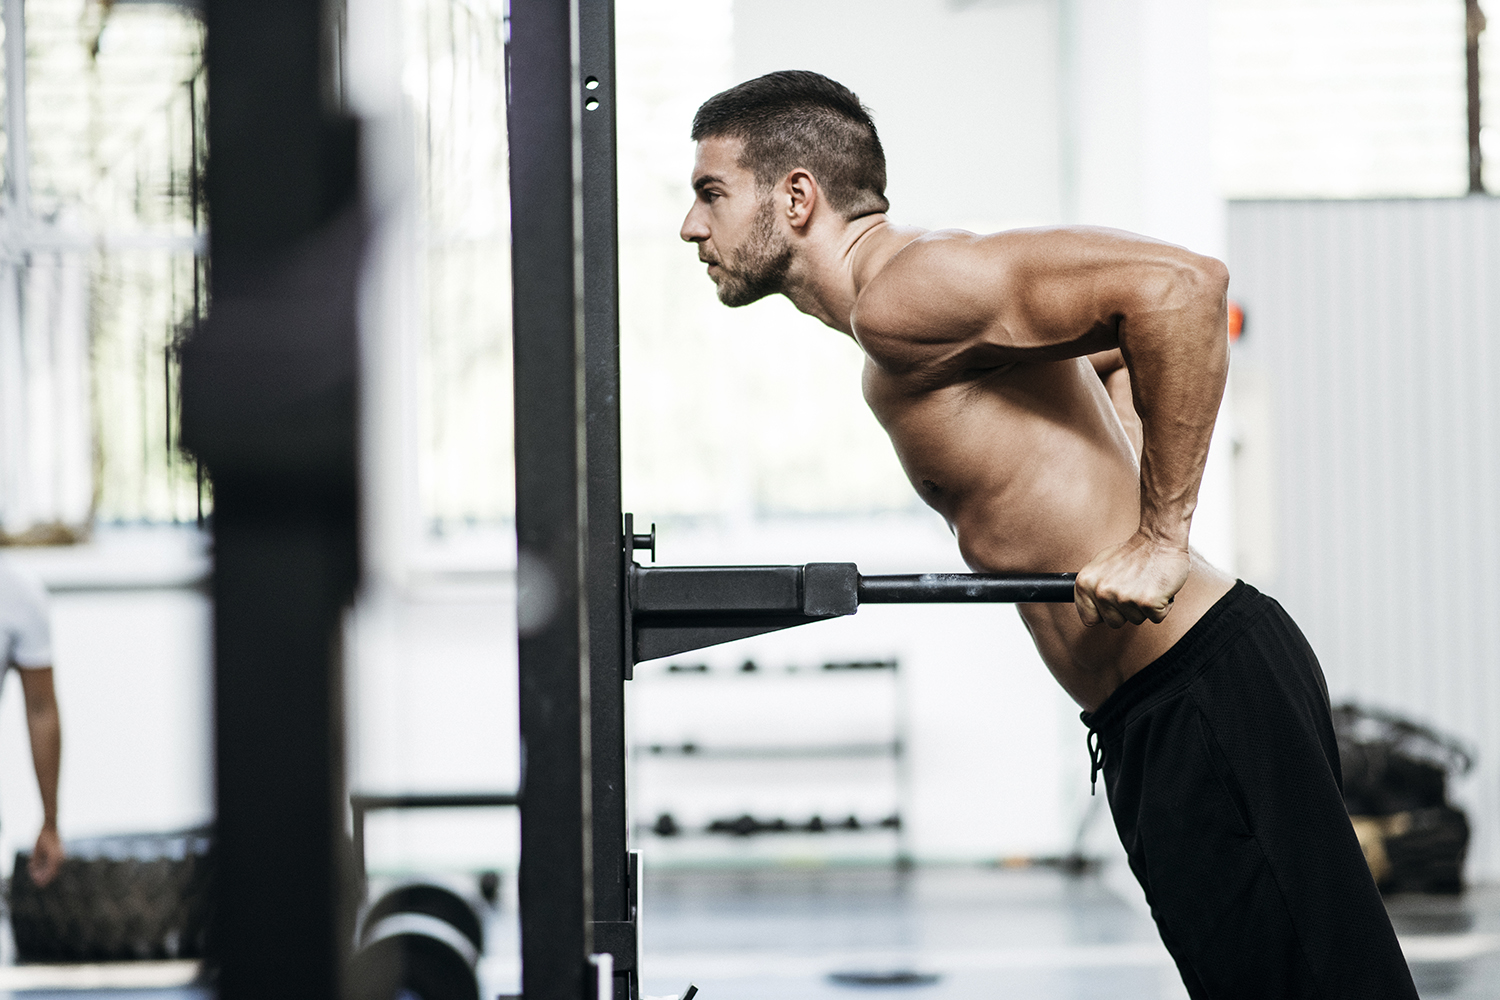 The 15 Best Manual Resistance Exercises to Help You Build Muscle Anywhere